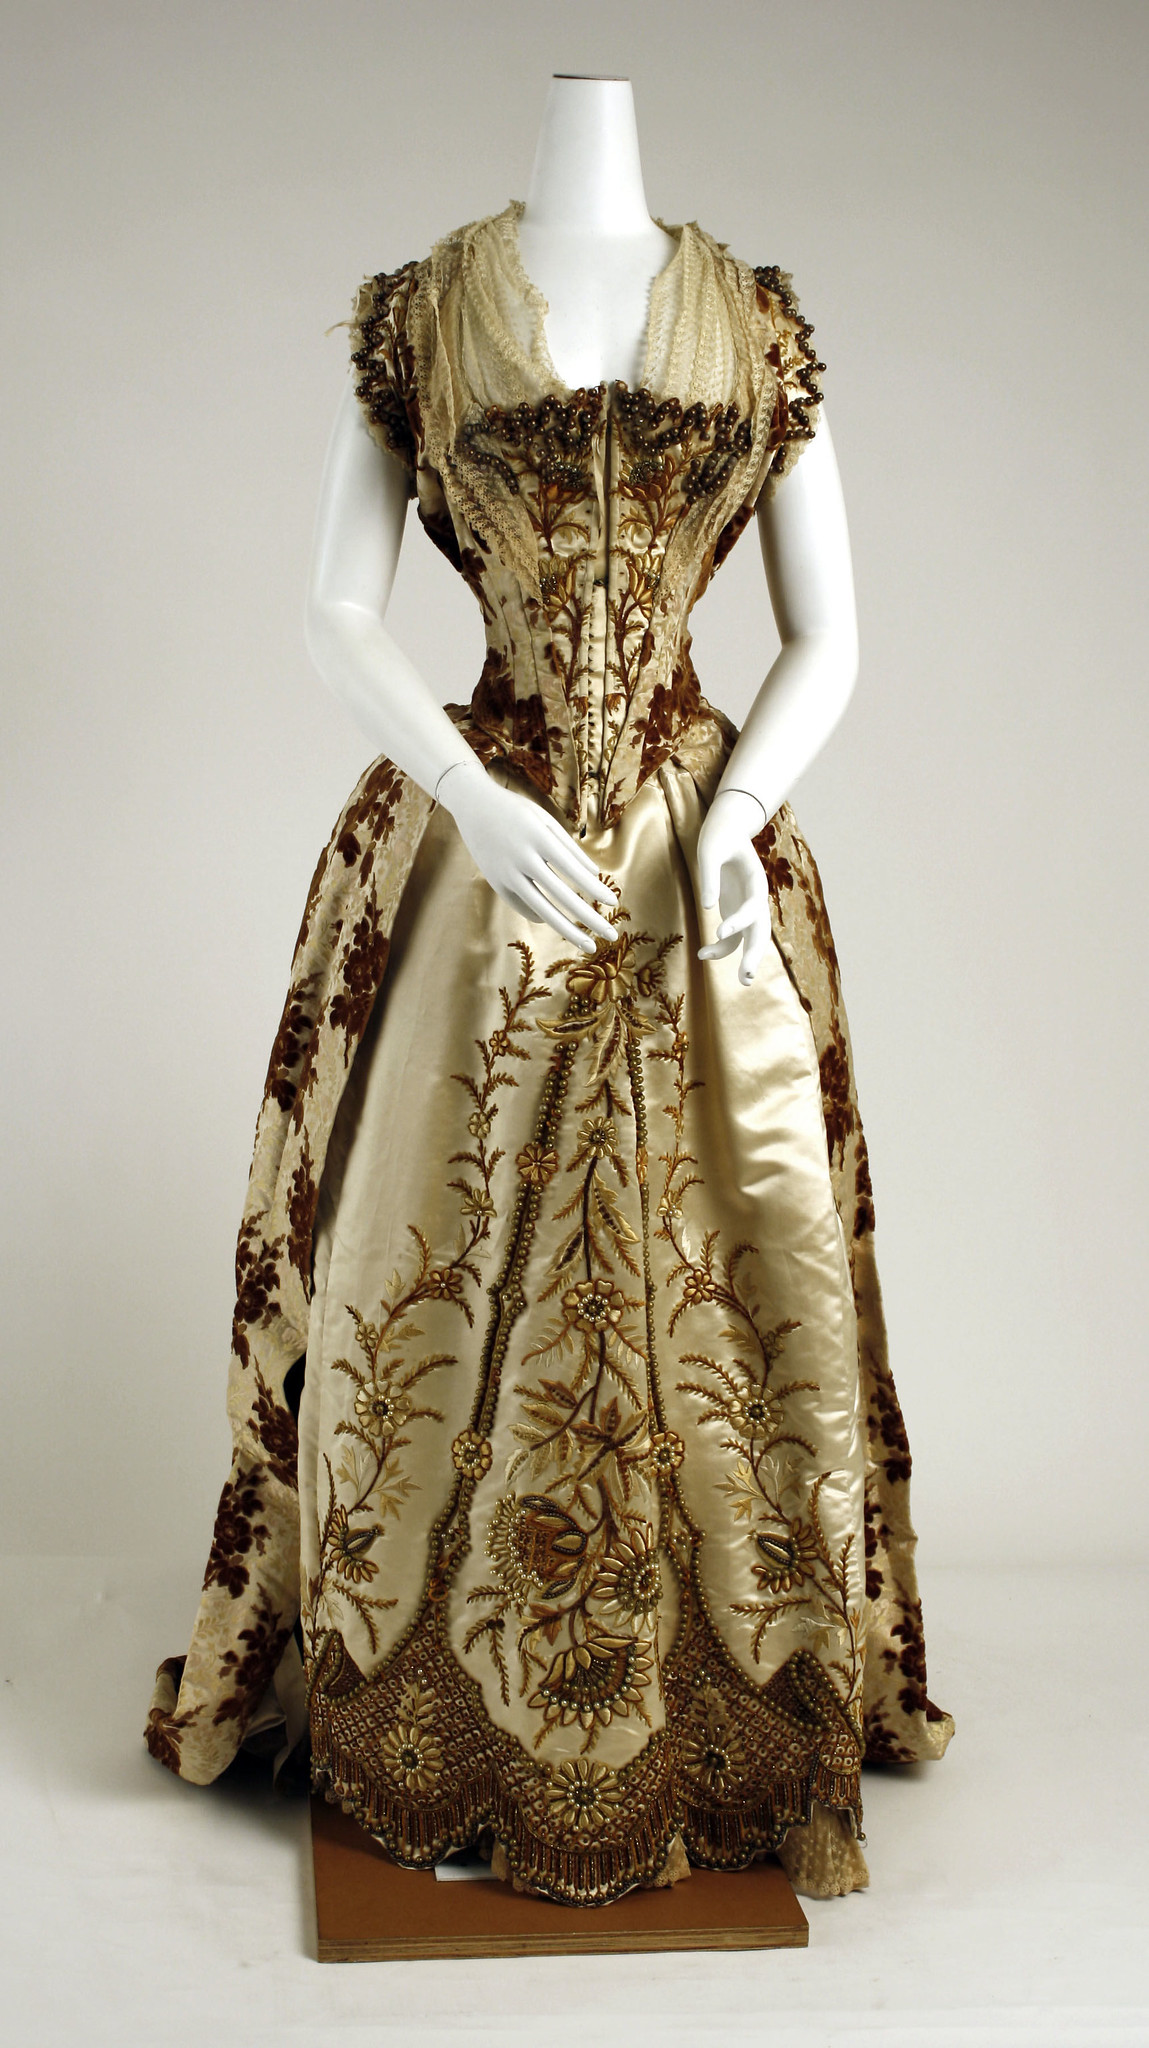 1887. French. Silk, Glass. metmuseum